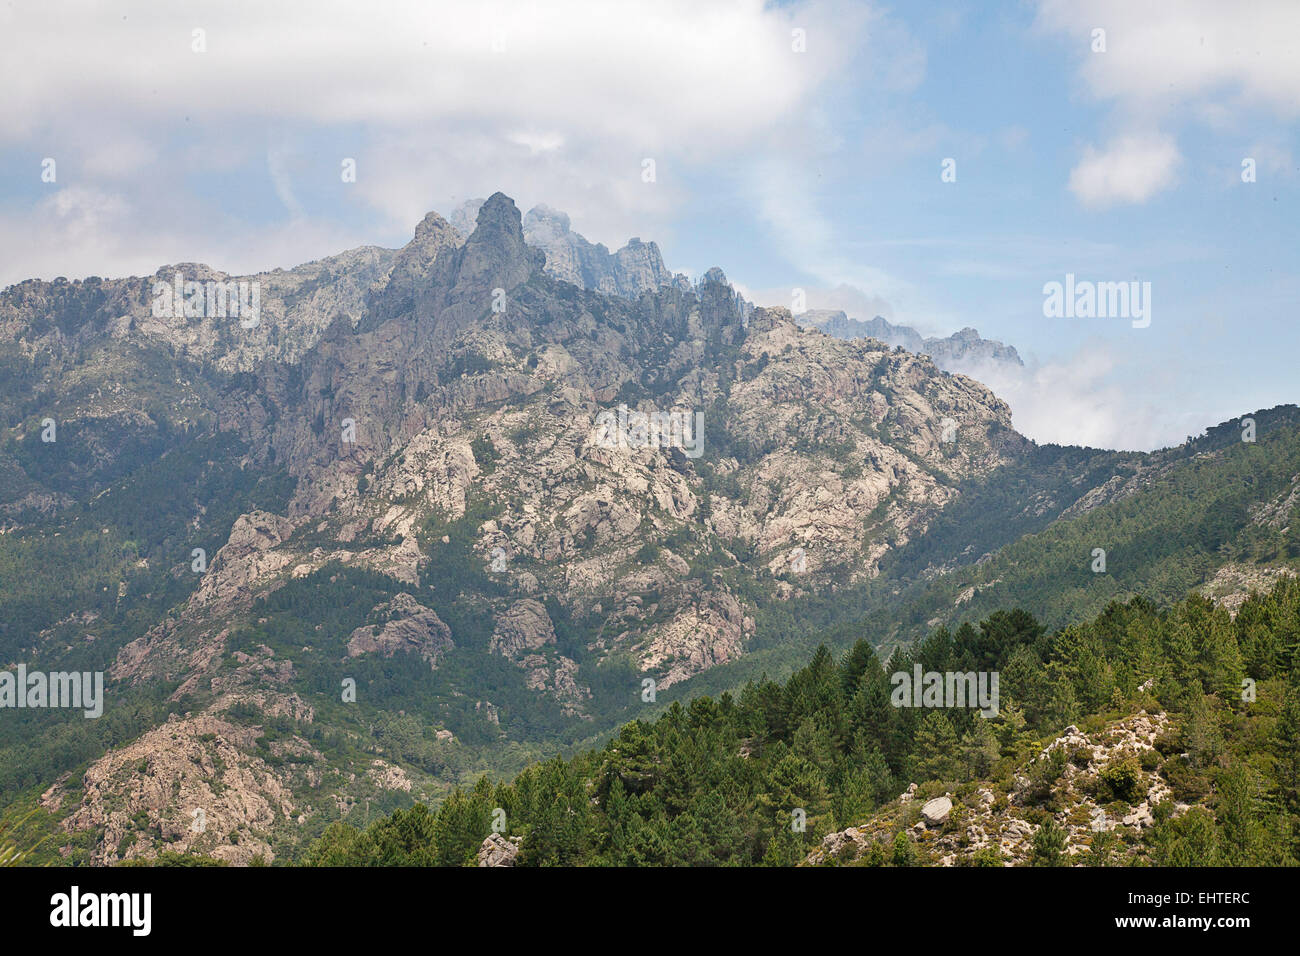 Central Corsica is dominated by rugged mountains and beautiful landscapes like these near the village of Zonza. Stock Photo